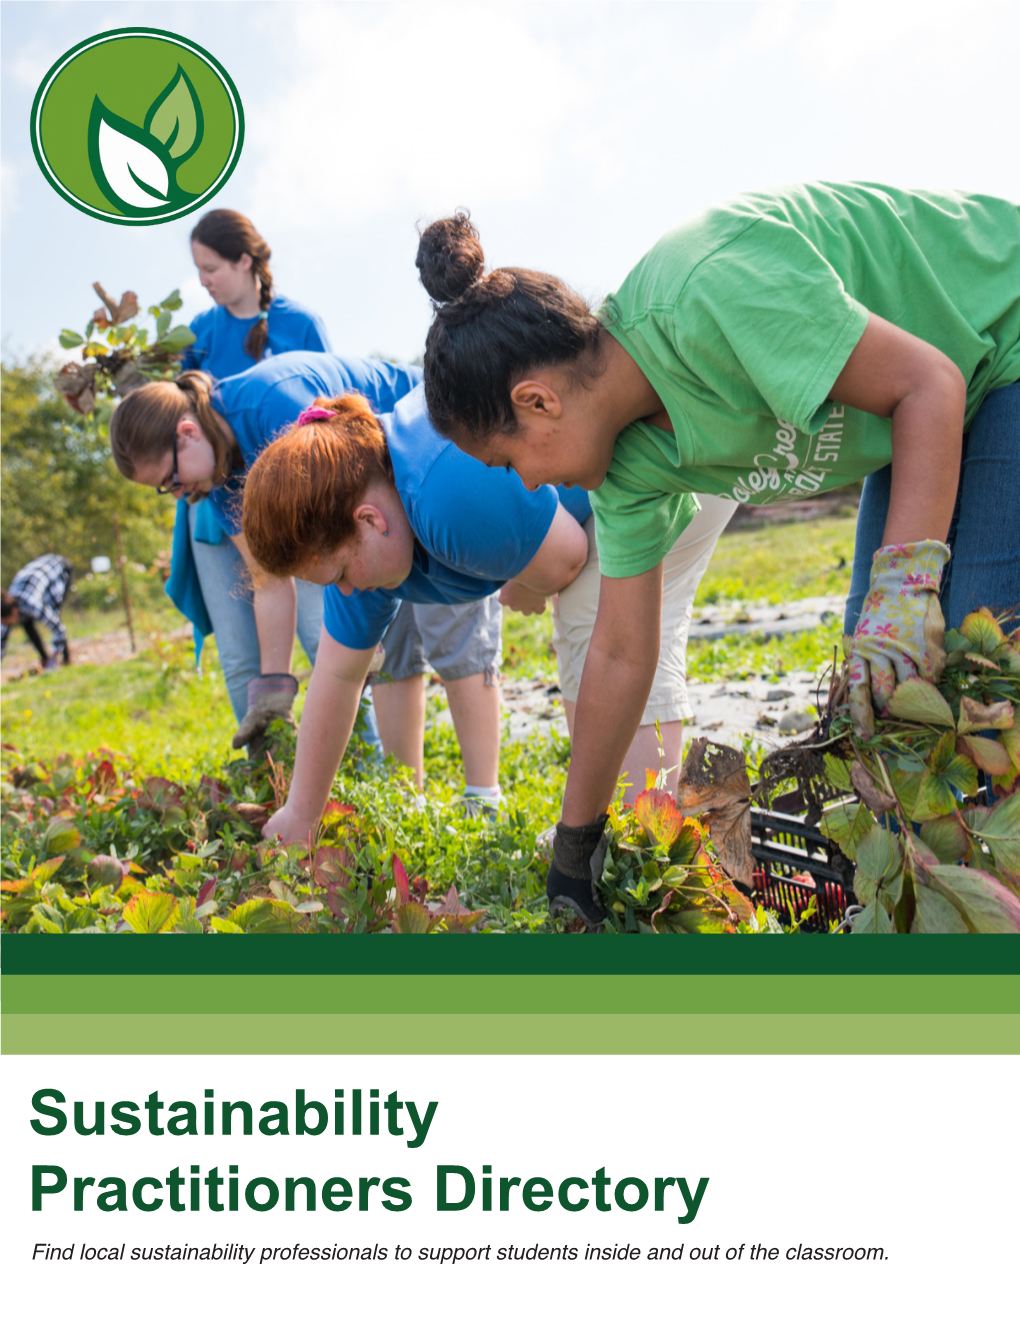 Sustainability Practitioners Directory Find Local Sustainability Professionals to Support Students Inside and out of the Classroom